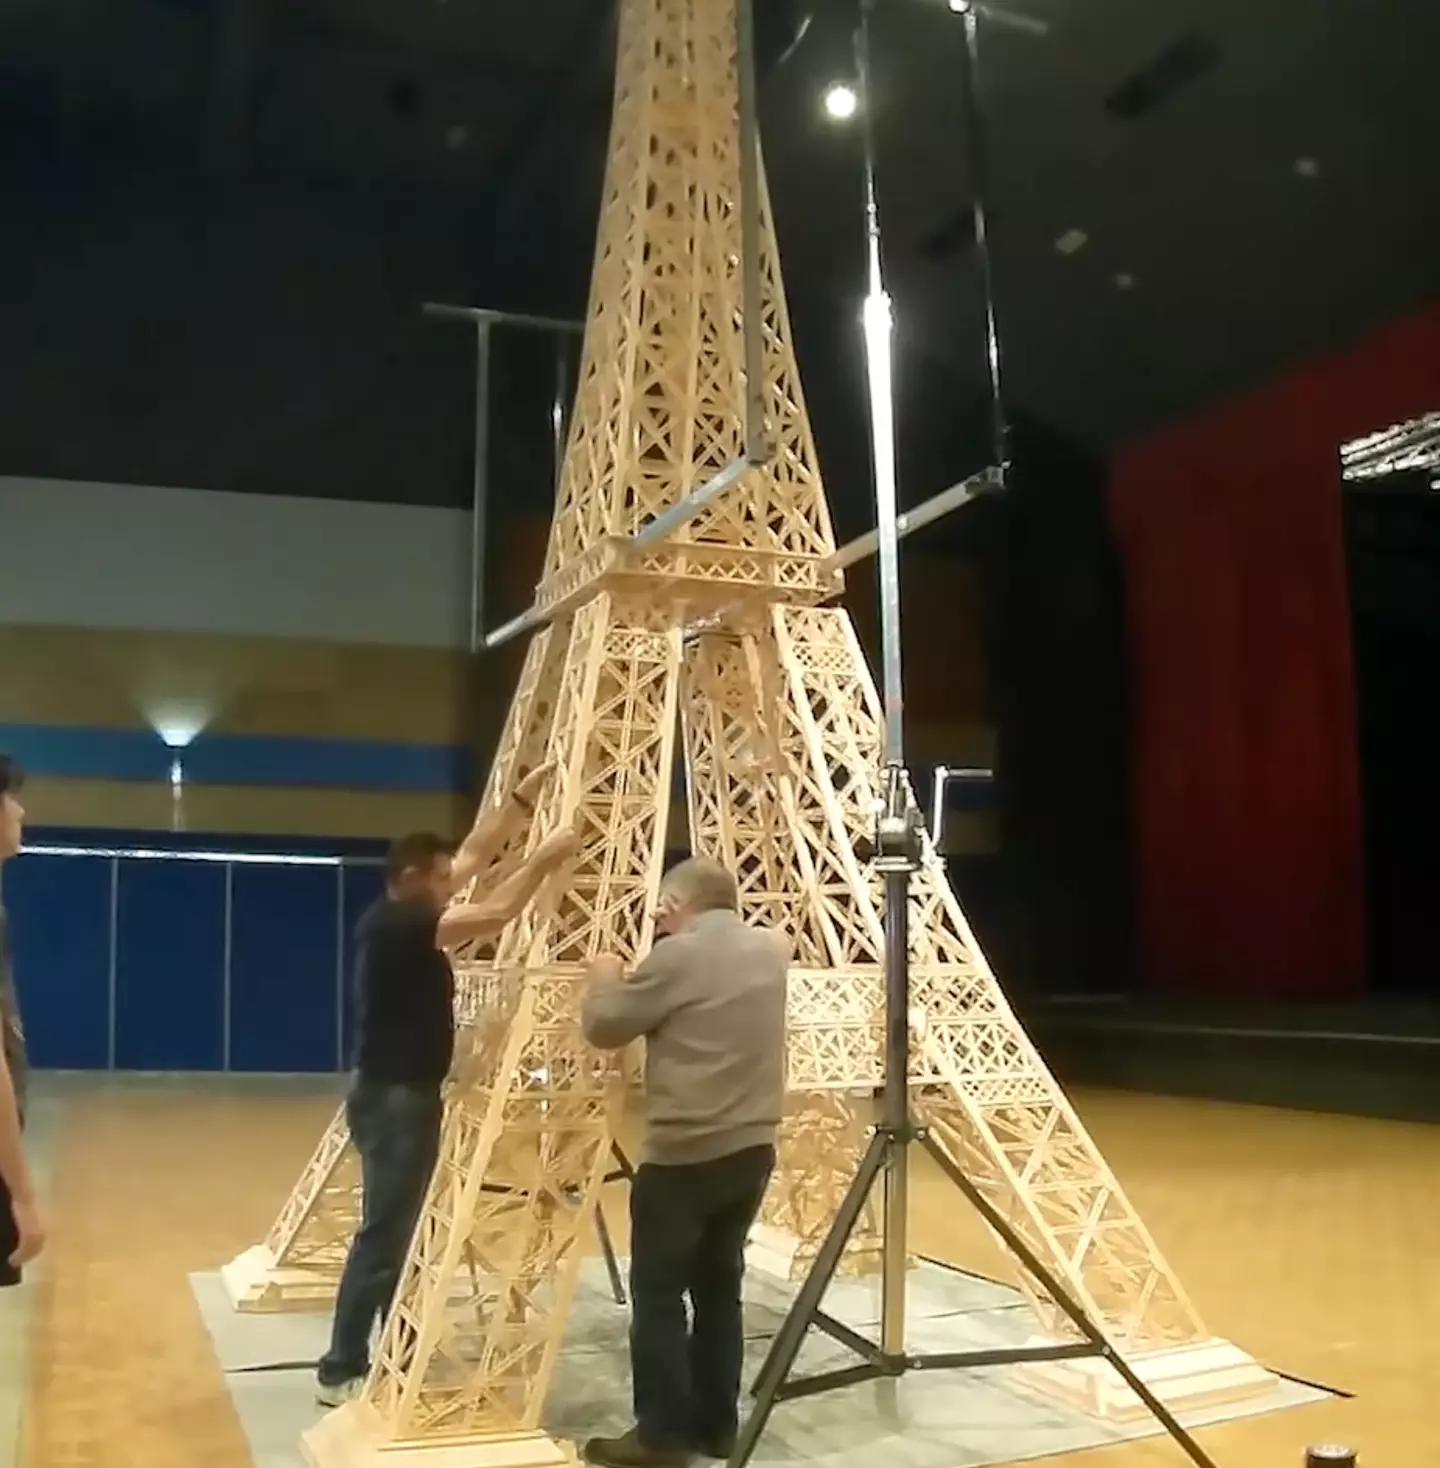 It took Plaud 4,200 hours to build his Eiffel Tower model.